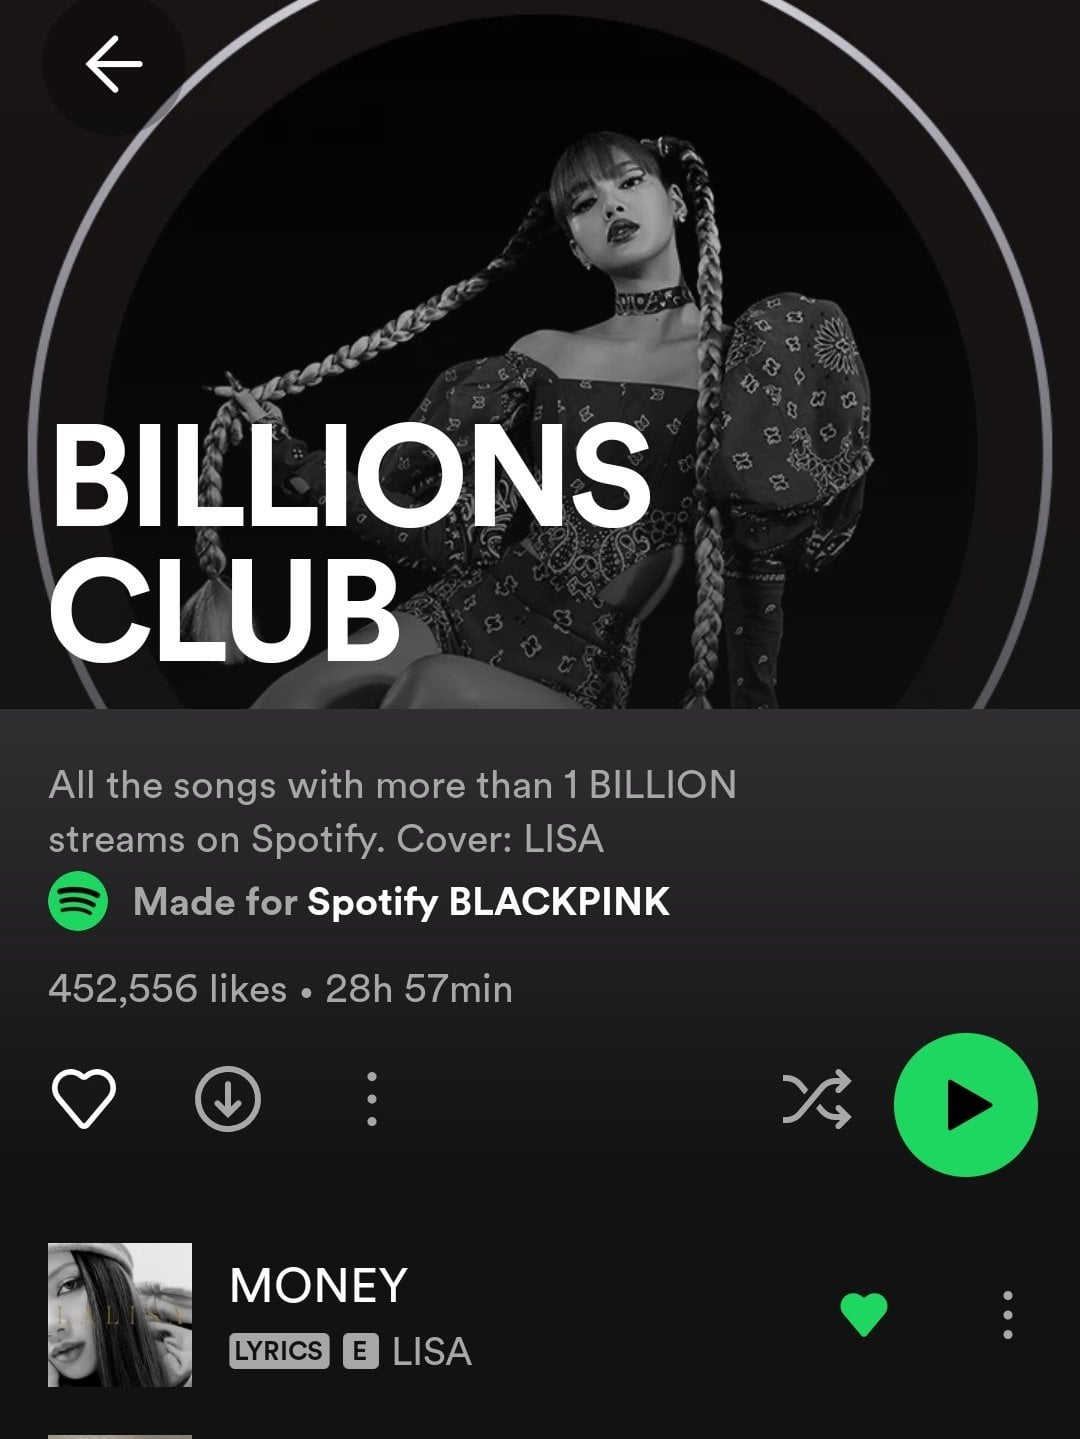 230919 LISA is now the cover of Spotify's "BILLIONS CLUB" playlist with "MONEY" at #1.